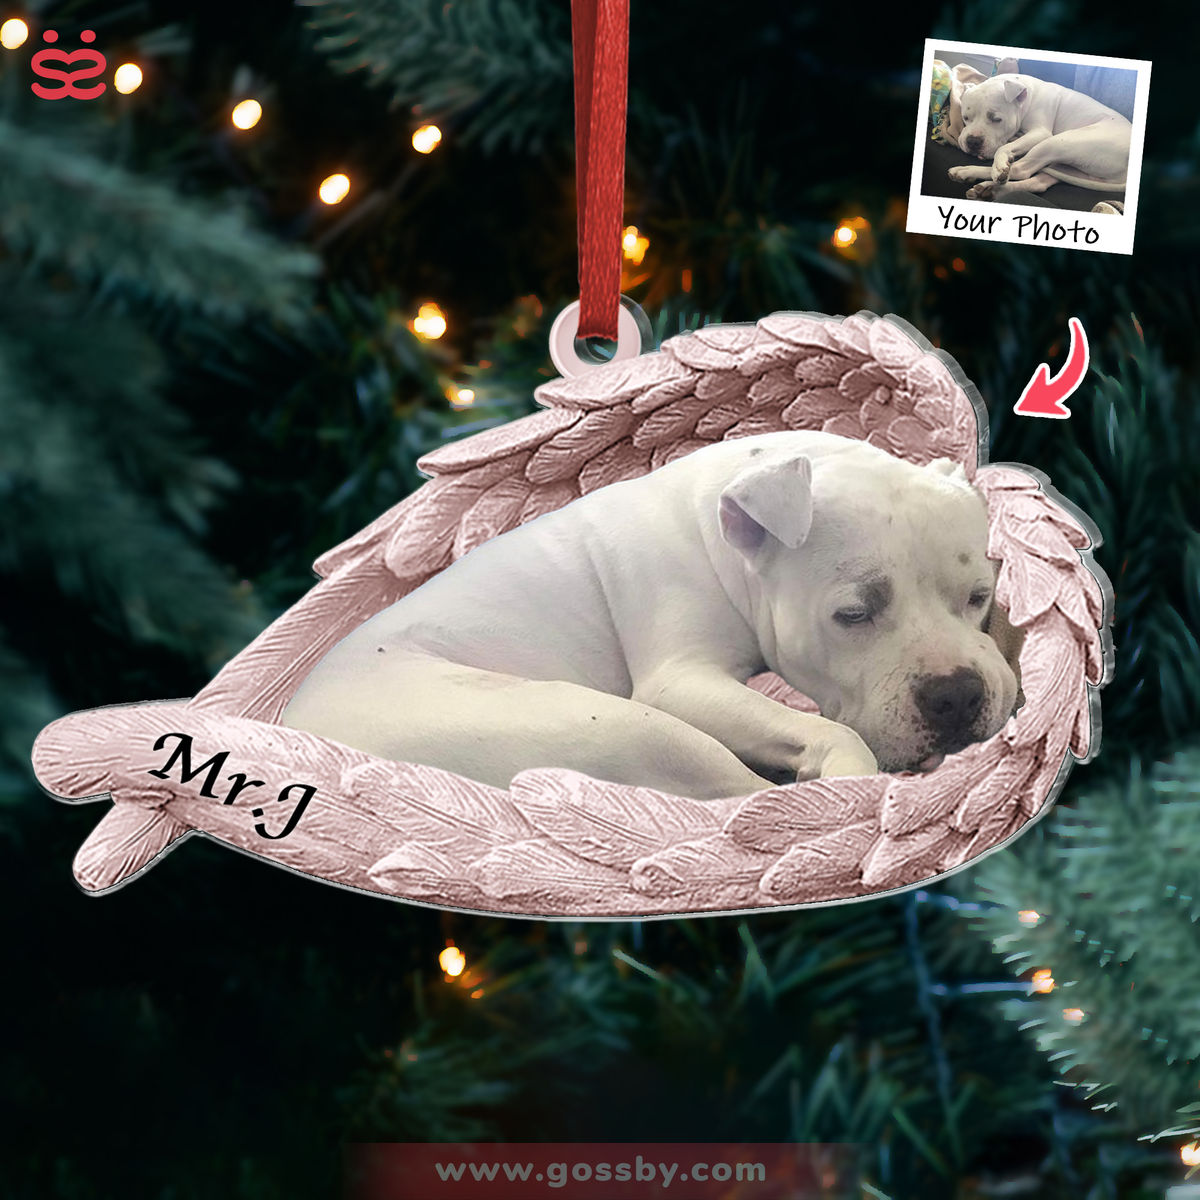 Dog Acrylic Ornament - Dog Lovers - Sleeping Pet Within Angel Wings - Customized Your Photo Ornament, Custom Photo Gifts, Christmas Gifts_3